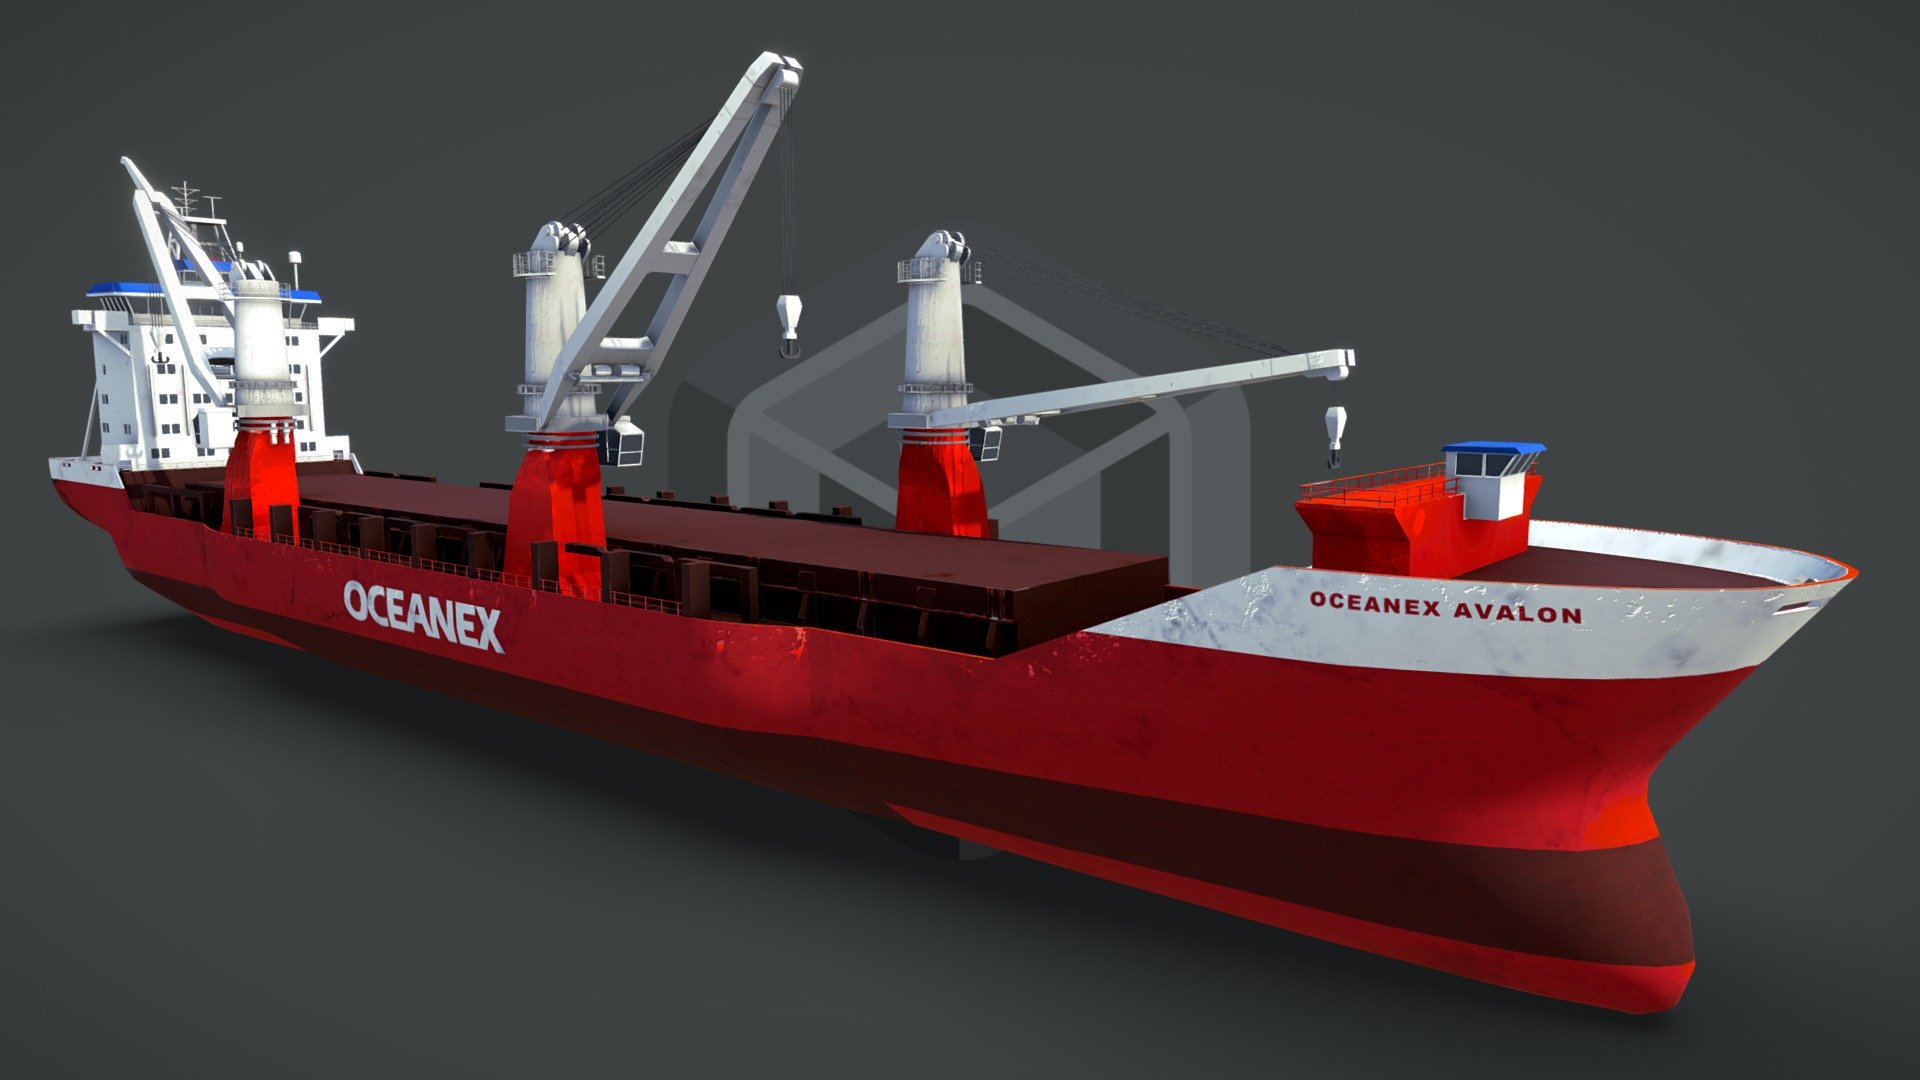 game ready

ideal for real time applications as good quality background object

PBR specular workflow ready

low poly model with 25415 tris at 17093 verts

100% triangulated

real-world scale: ship length appr. 157 m

as heavy lift multi purpose dry cargo vessel it is not limited to container tonnage only: place your own load on it

as project cargo ship it includes heavy-lift cranes, not rigged or animated

no propeller or rudder included

pivot placed on water line / 

100% unwrapped, non-overlapping

3 x uv layouts for hull, bridge and window glass

files include only standard materials (1 x multi-sub with 4 x mat id´s)

2 x PBR textures sets with 8 x png textures in native 4K for hull and bridge

2 x base diffuse, 2 x specular diffuse, 2 x gloss, 2 x normal

1 x simple texture for windows in 1K

included native 3dsmax 2014 file

included file formats are 3ds, fbx, obj
 - Heavy Lift Cargo Ship Oceanex Livery - Buy Royalty Free 3D model by CGAmp 3d model